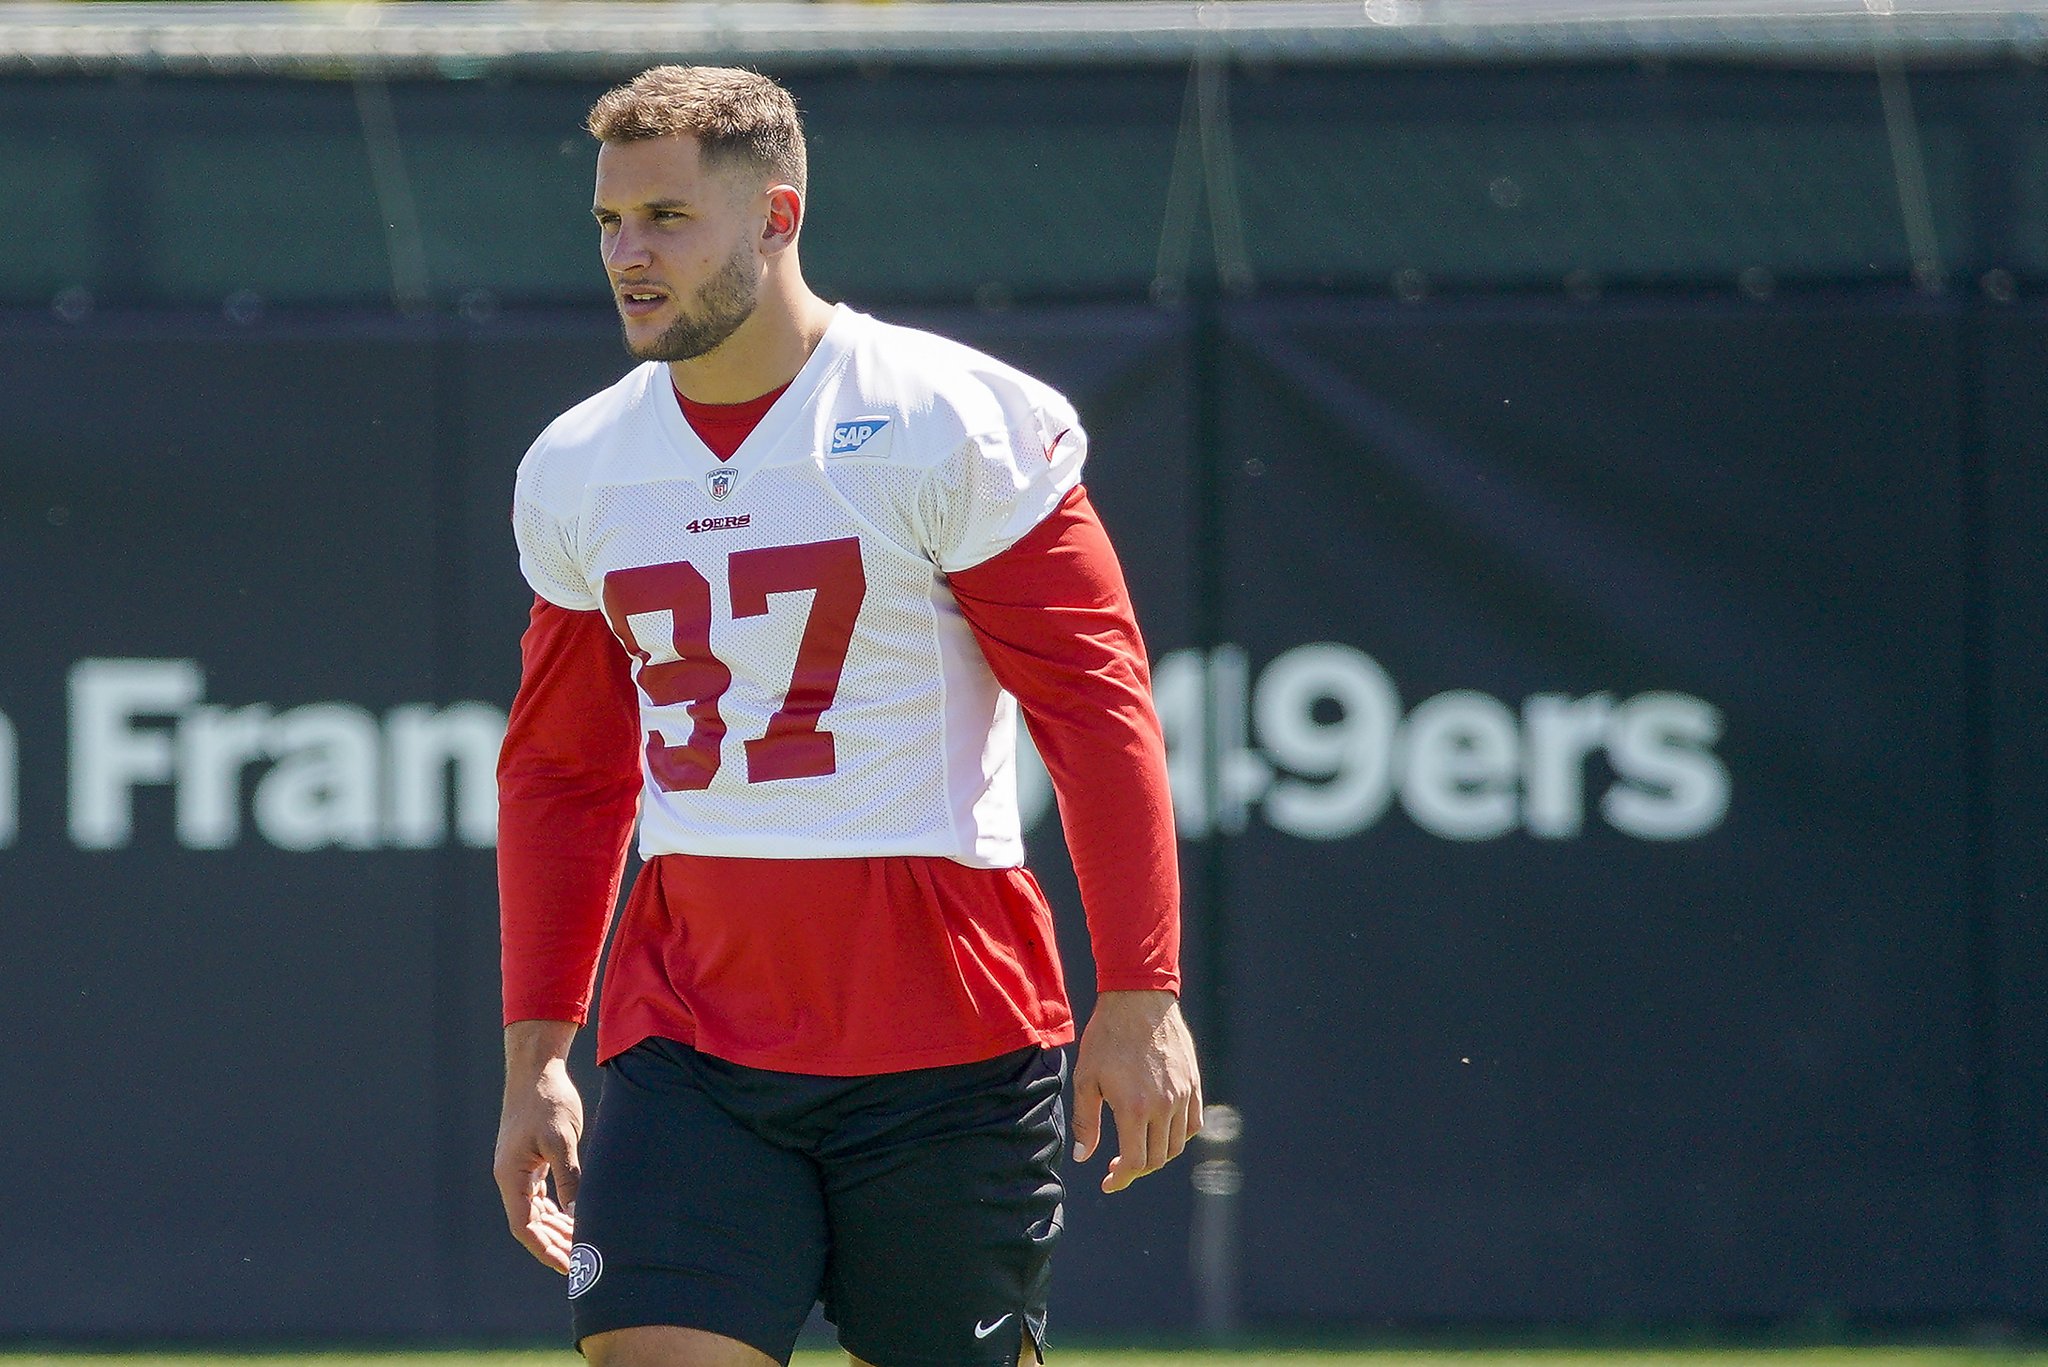 Top draft pick Nick Bosa a natural for 49ers: promising and injured